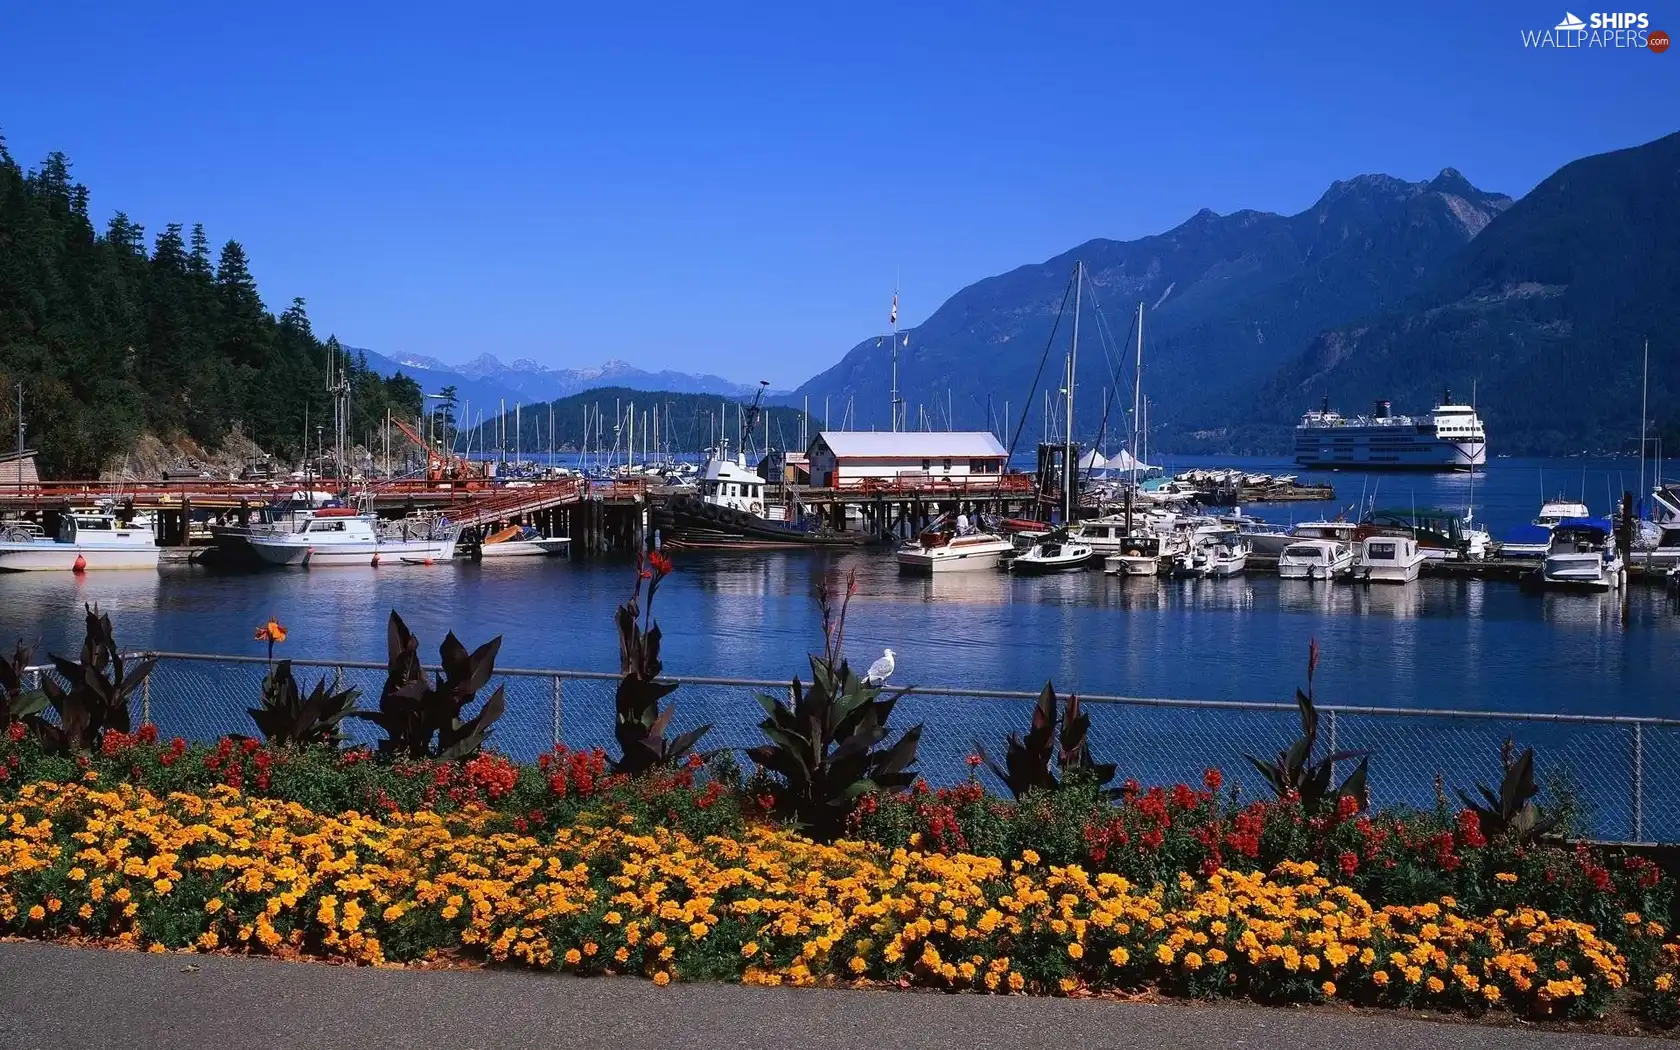 Mountains, Flowers, Ship, motorboat, port